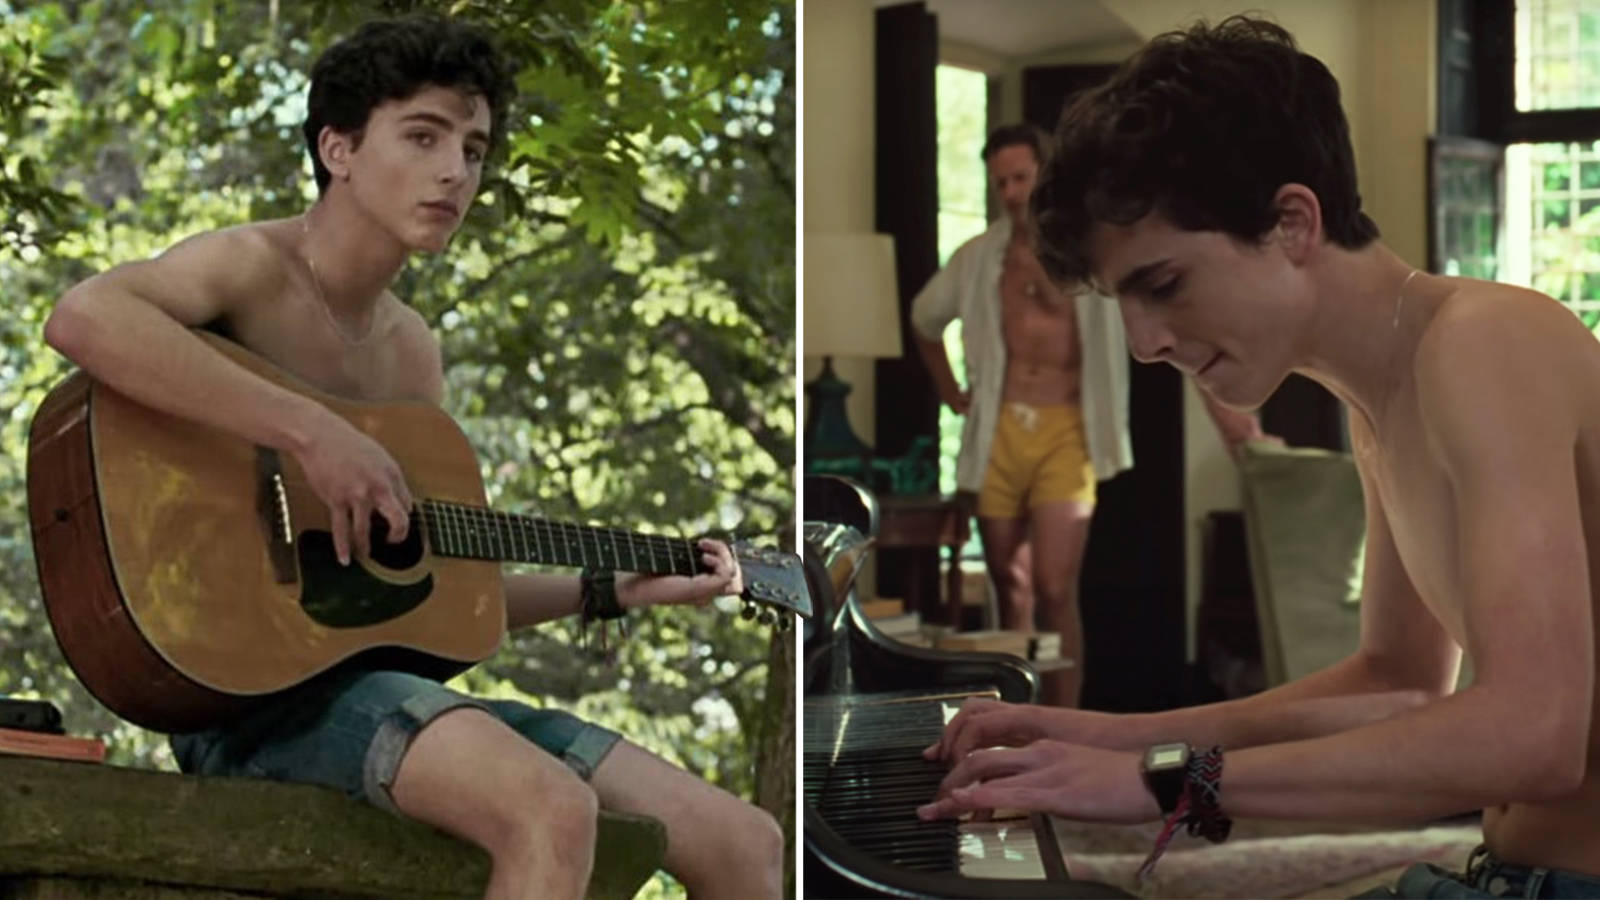 Can Timothée Chalamet really play piano? Watch his Bach